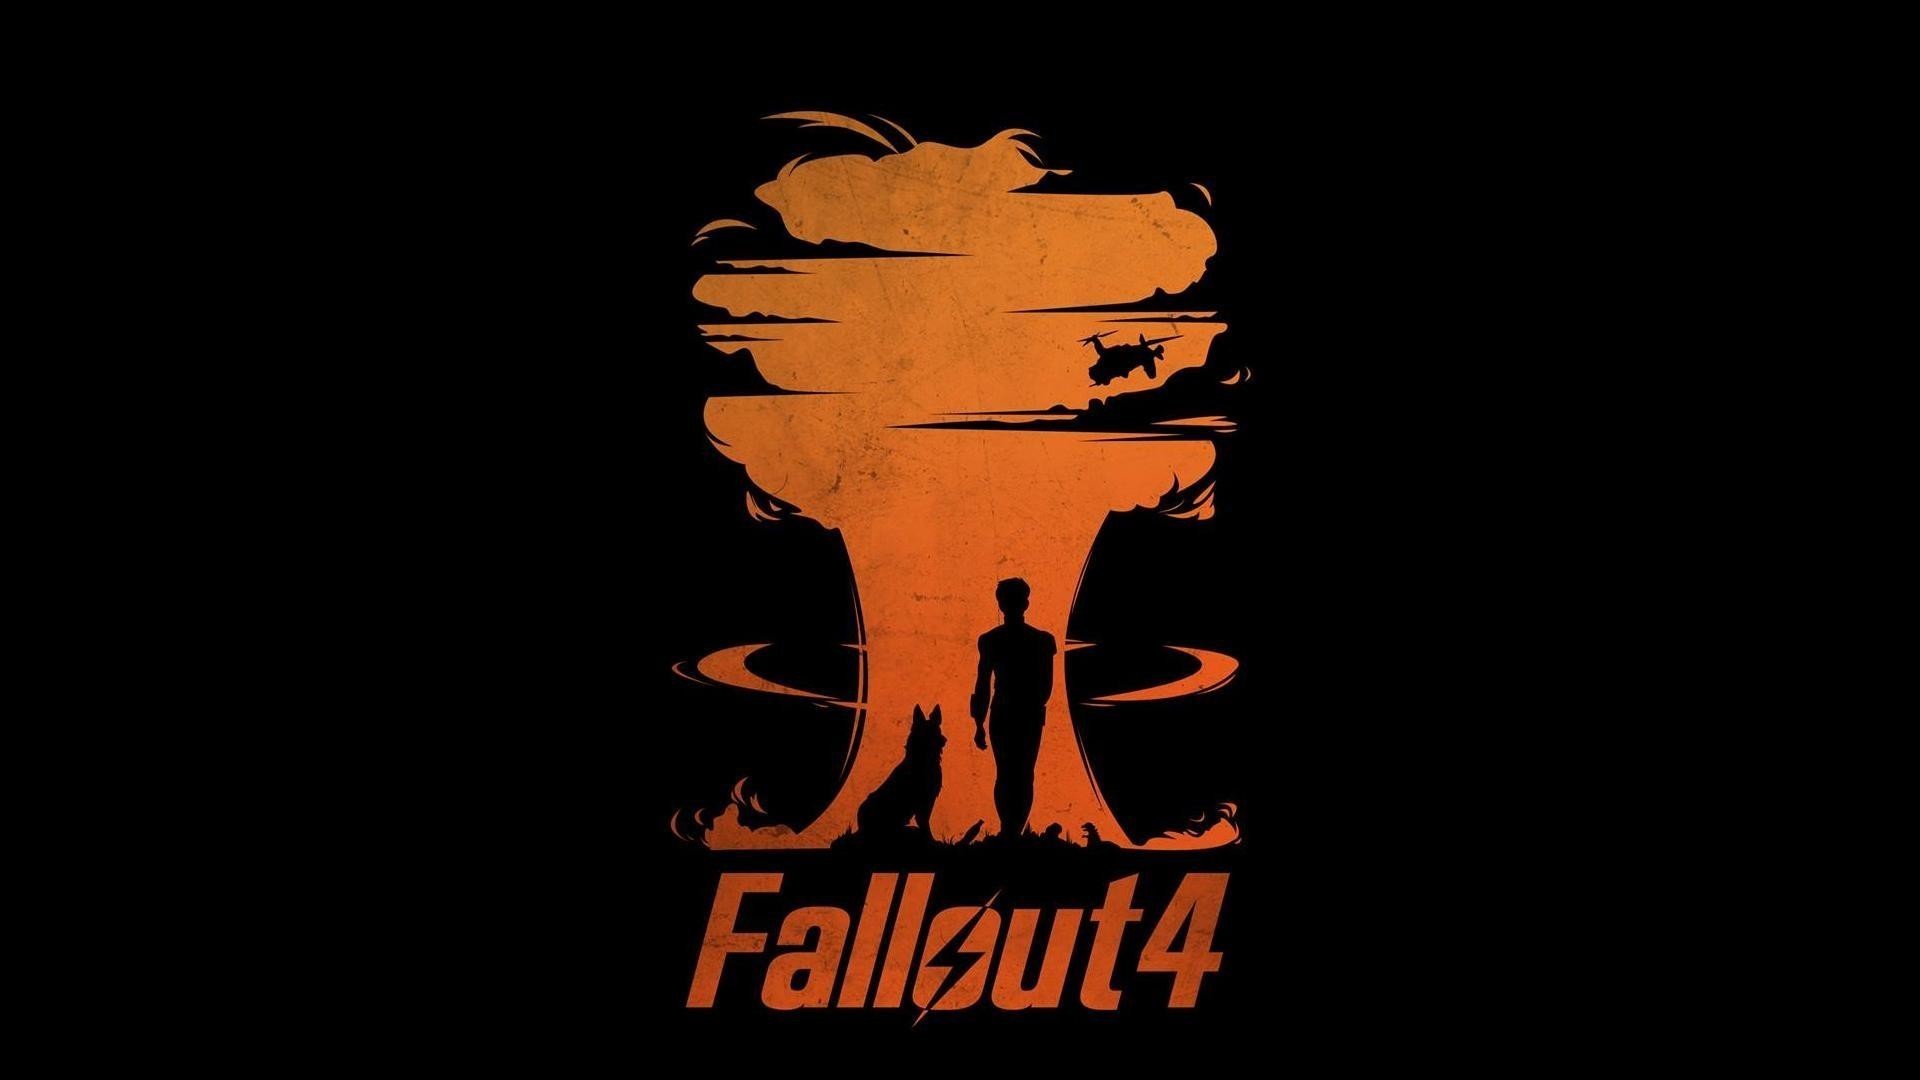 1920x1080 Fallout 4 Wallpapers High Definition